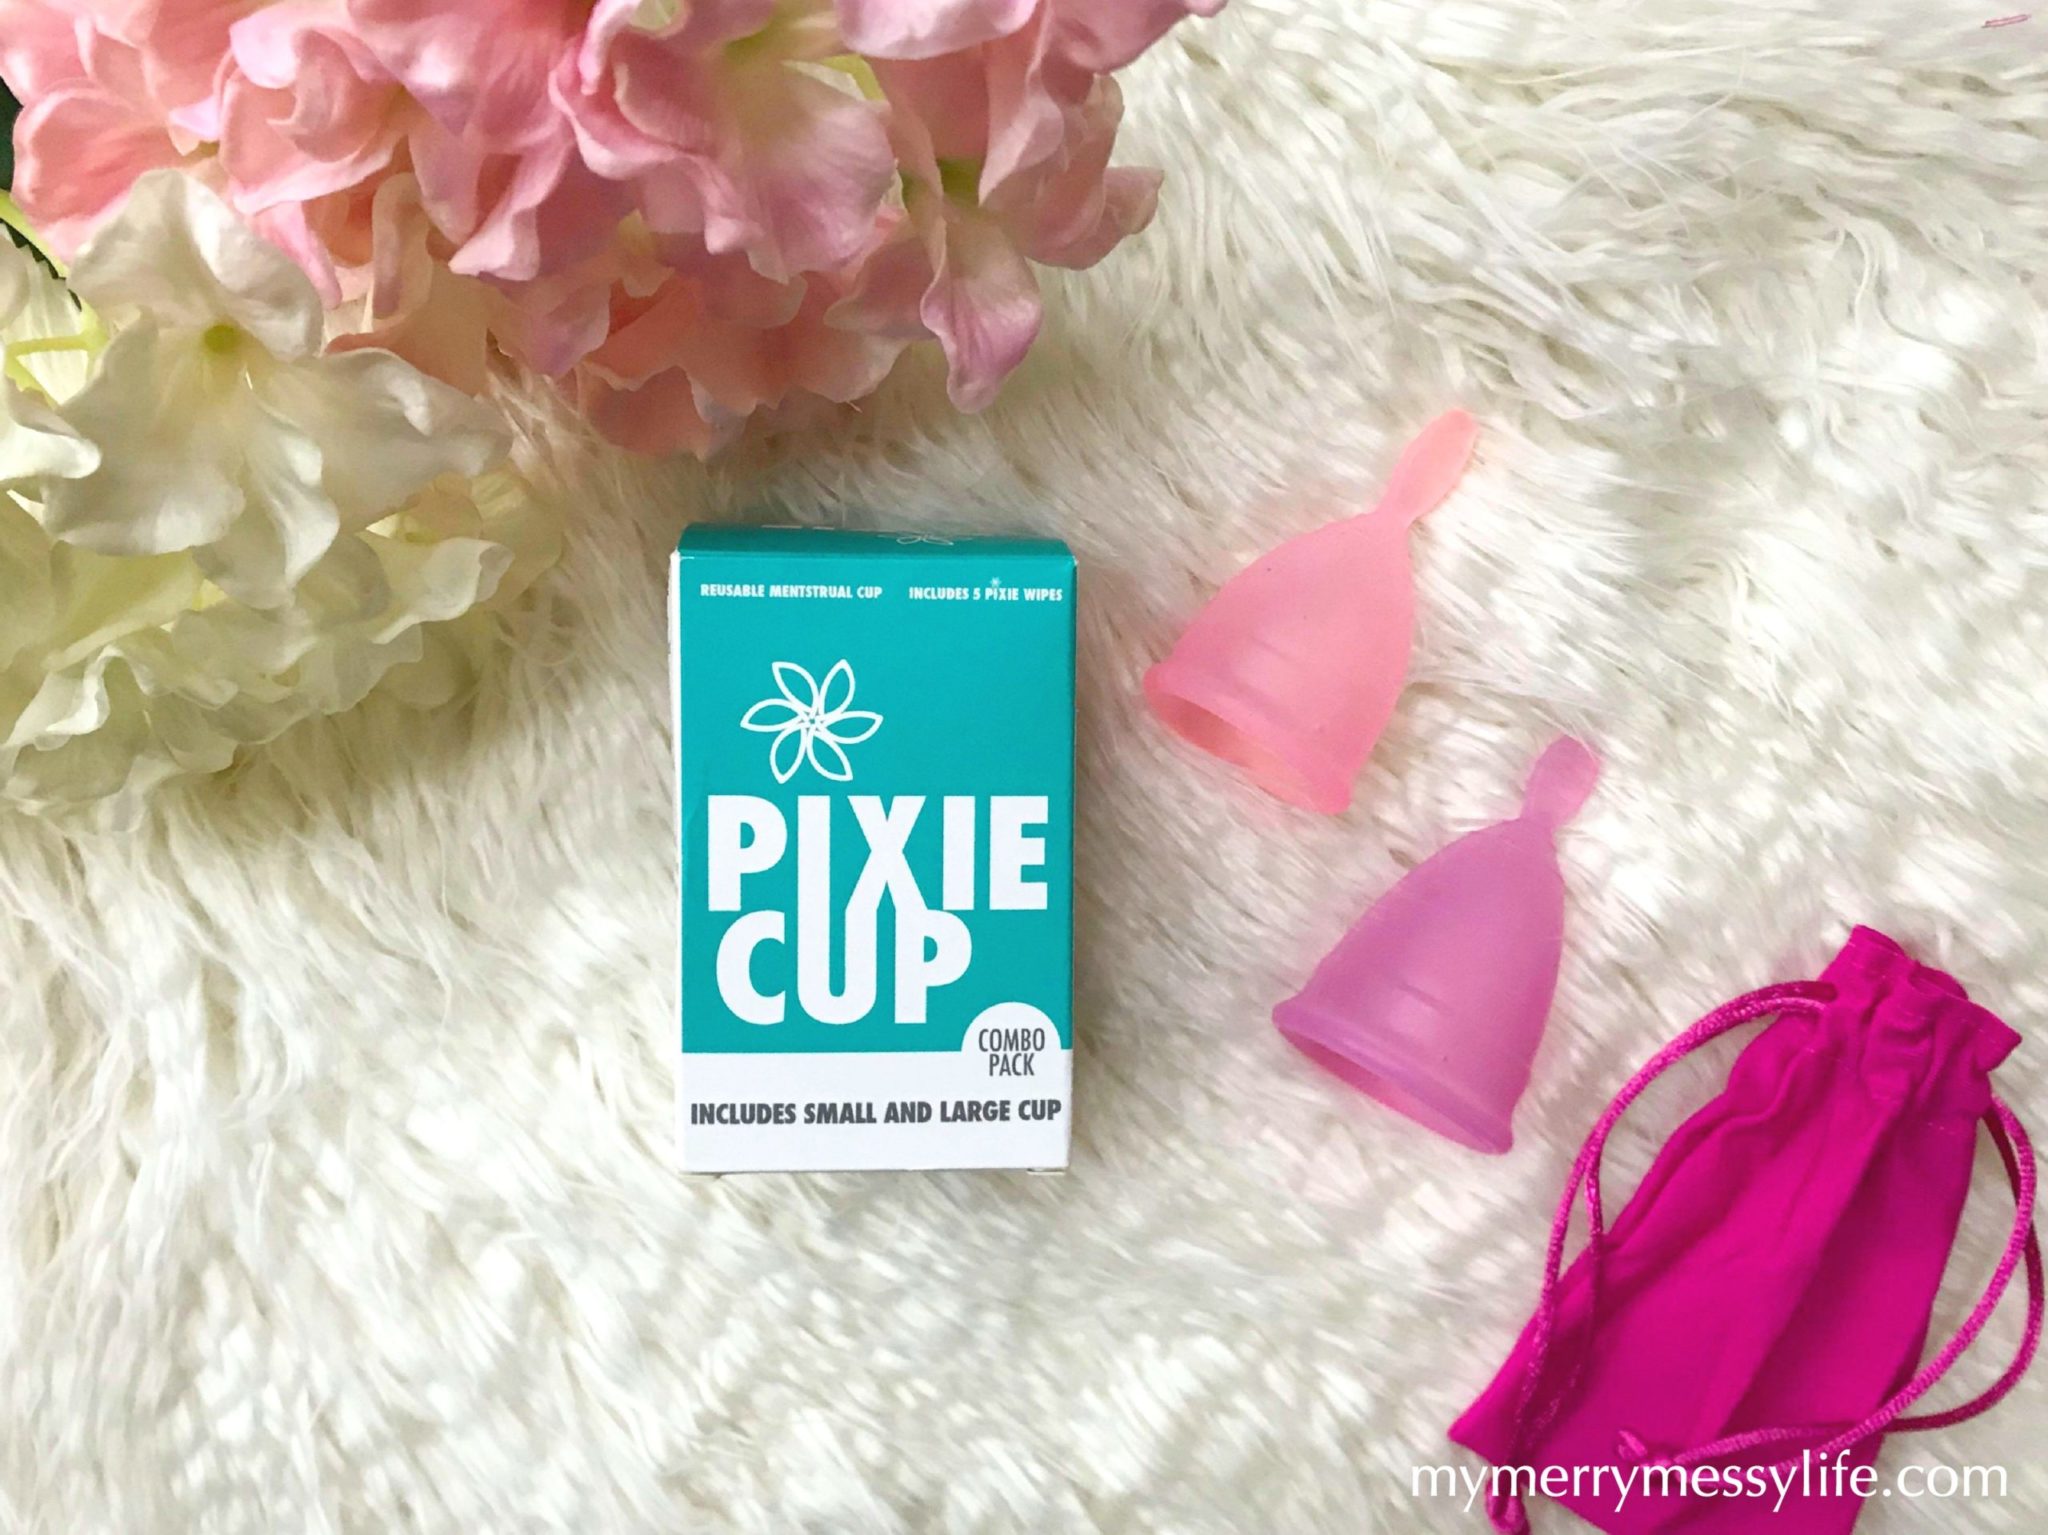 A woman's dream - a menstrual cup! Ditch pads and tampons and save yourself from toxic chemicals